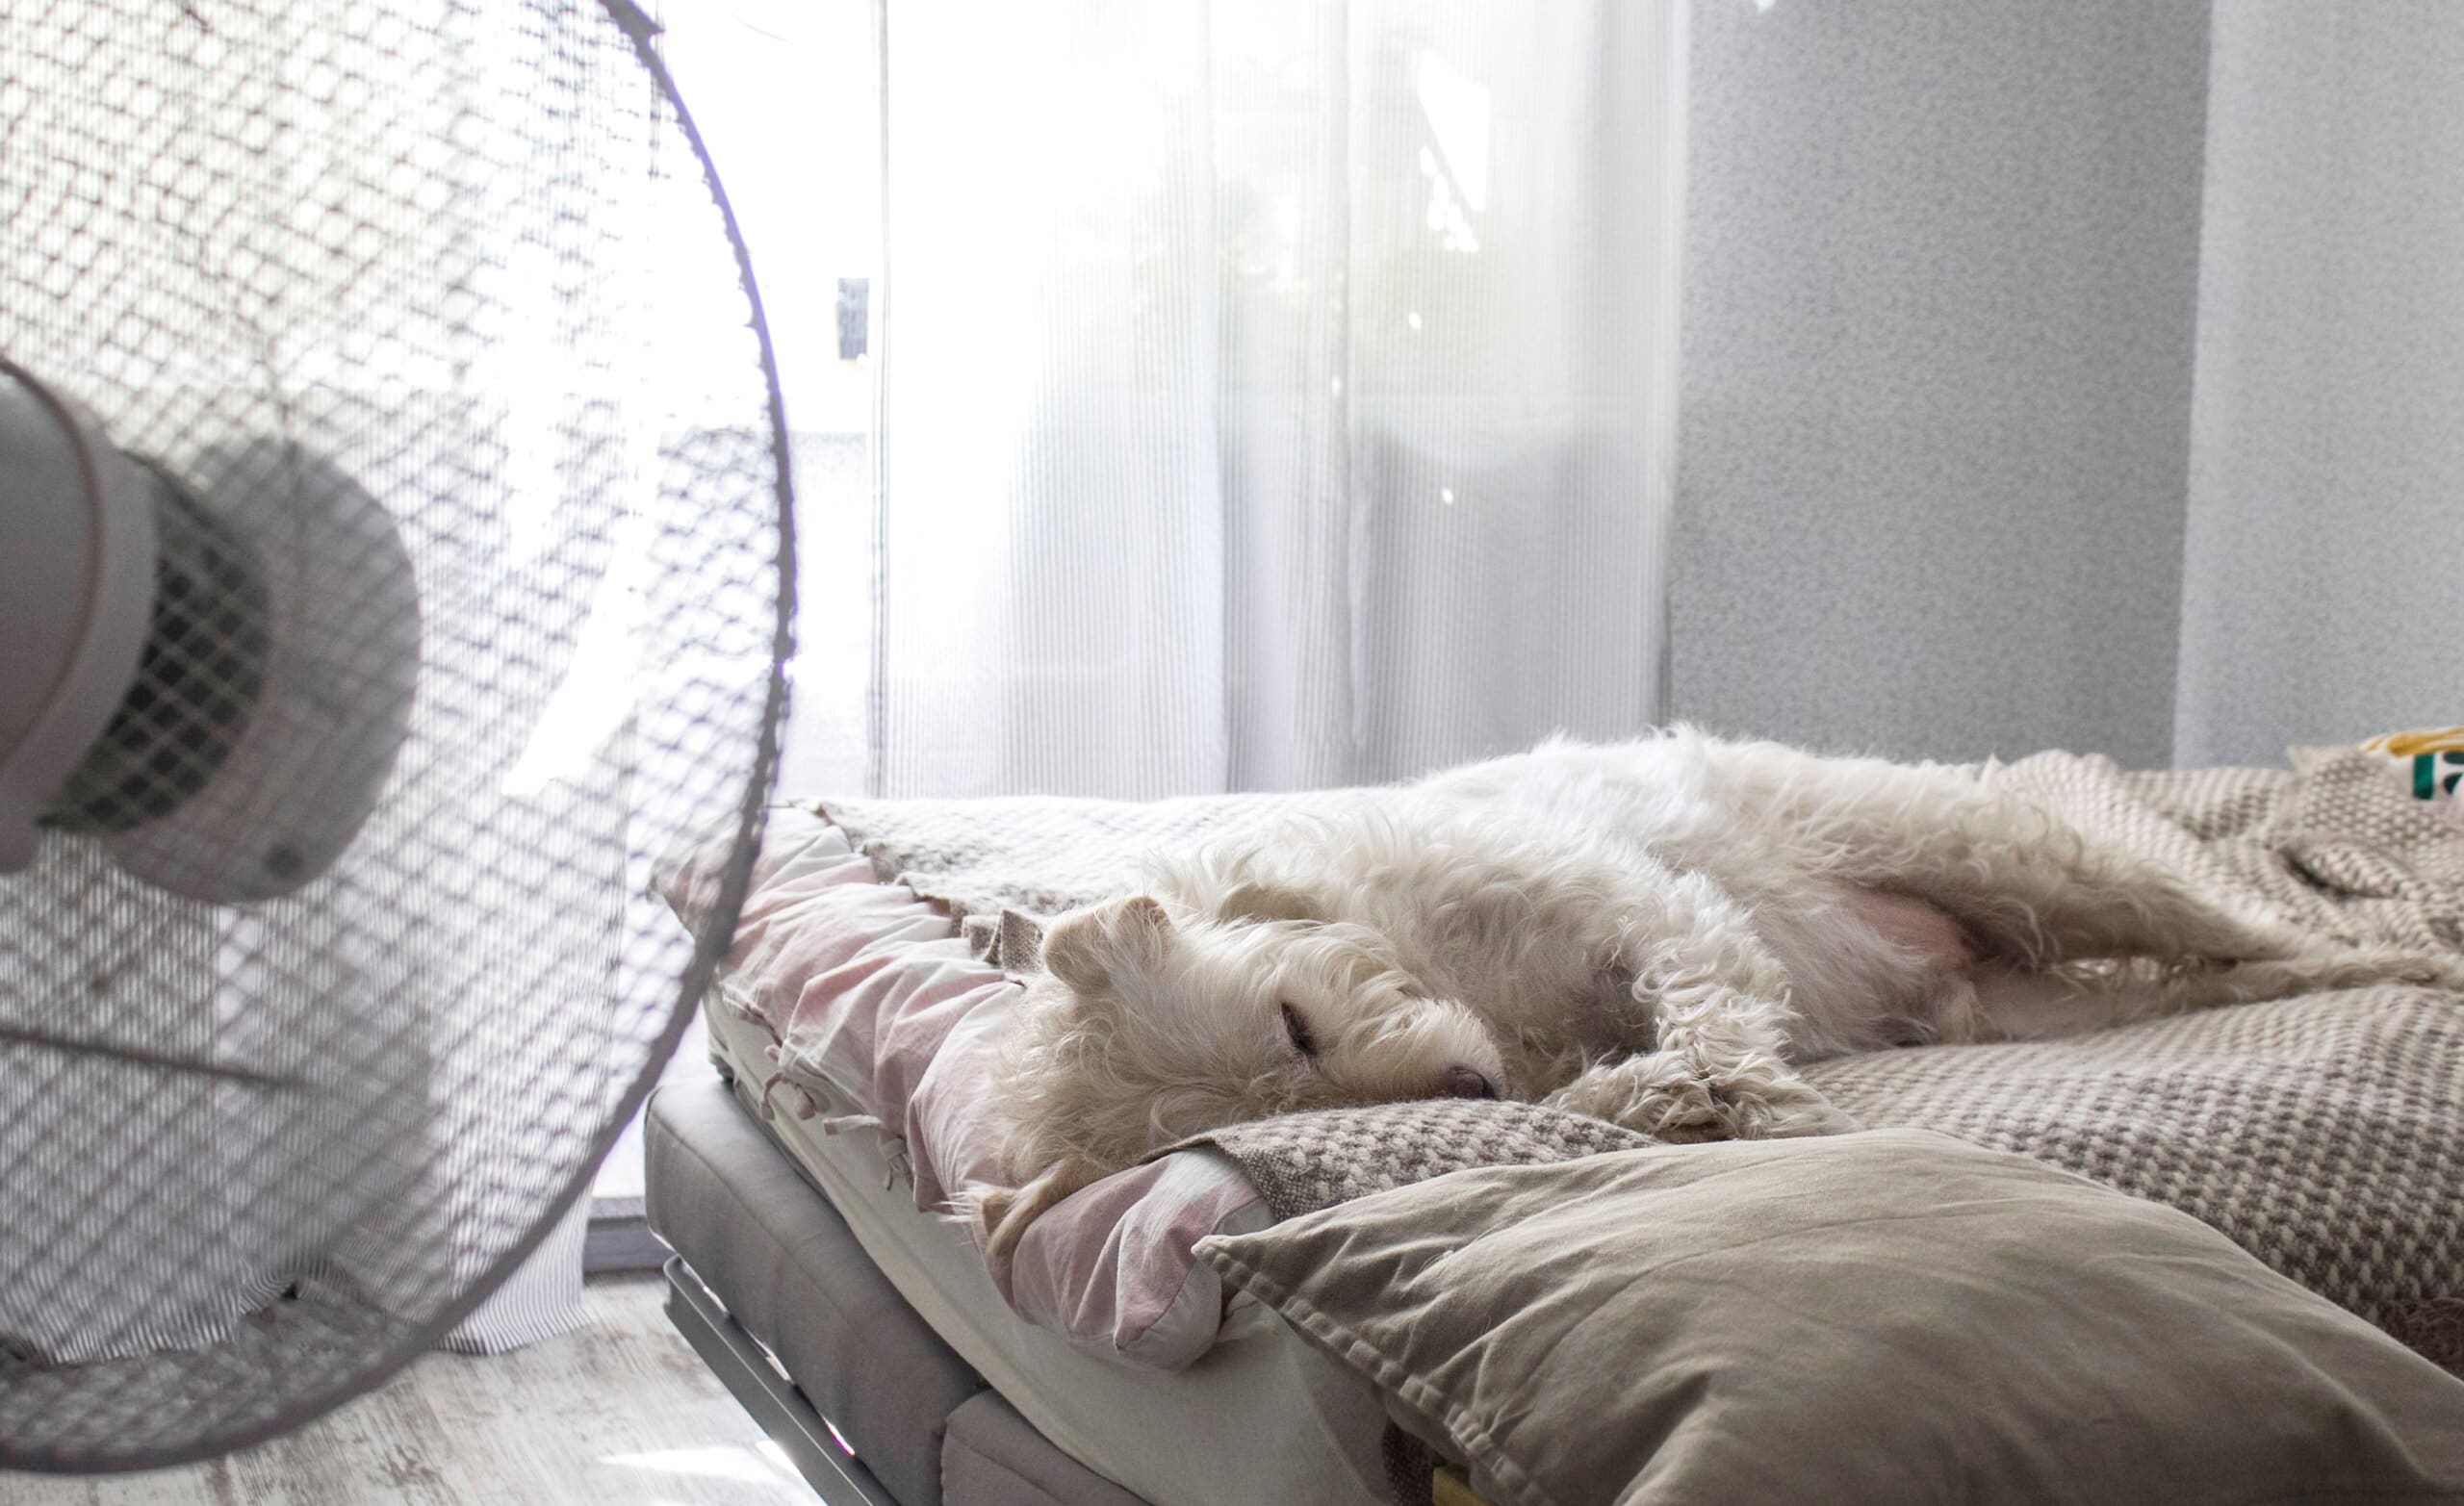 Hot dog laying on bed with fan blowing on them.